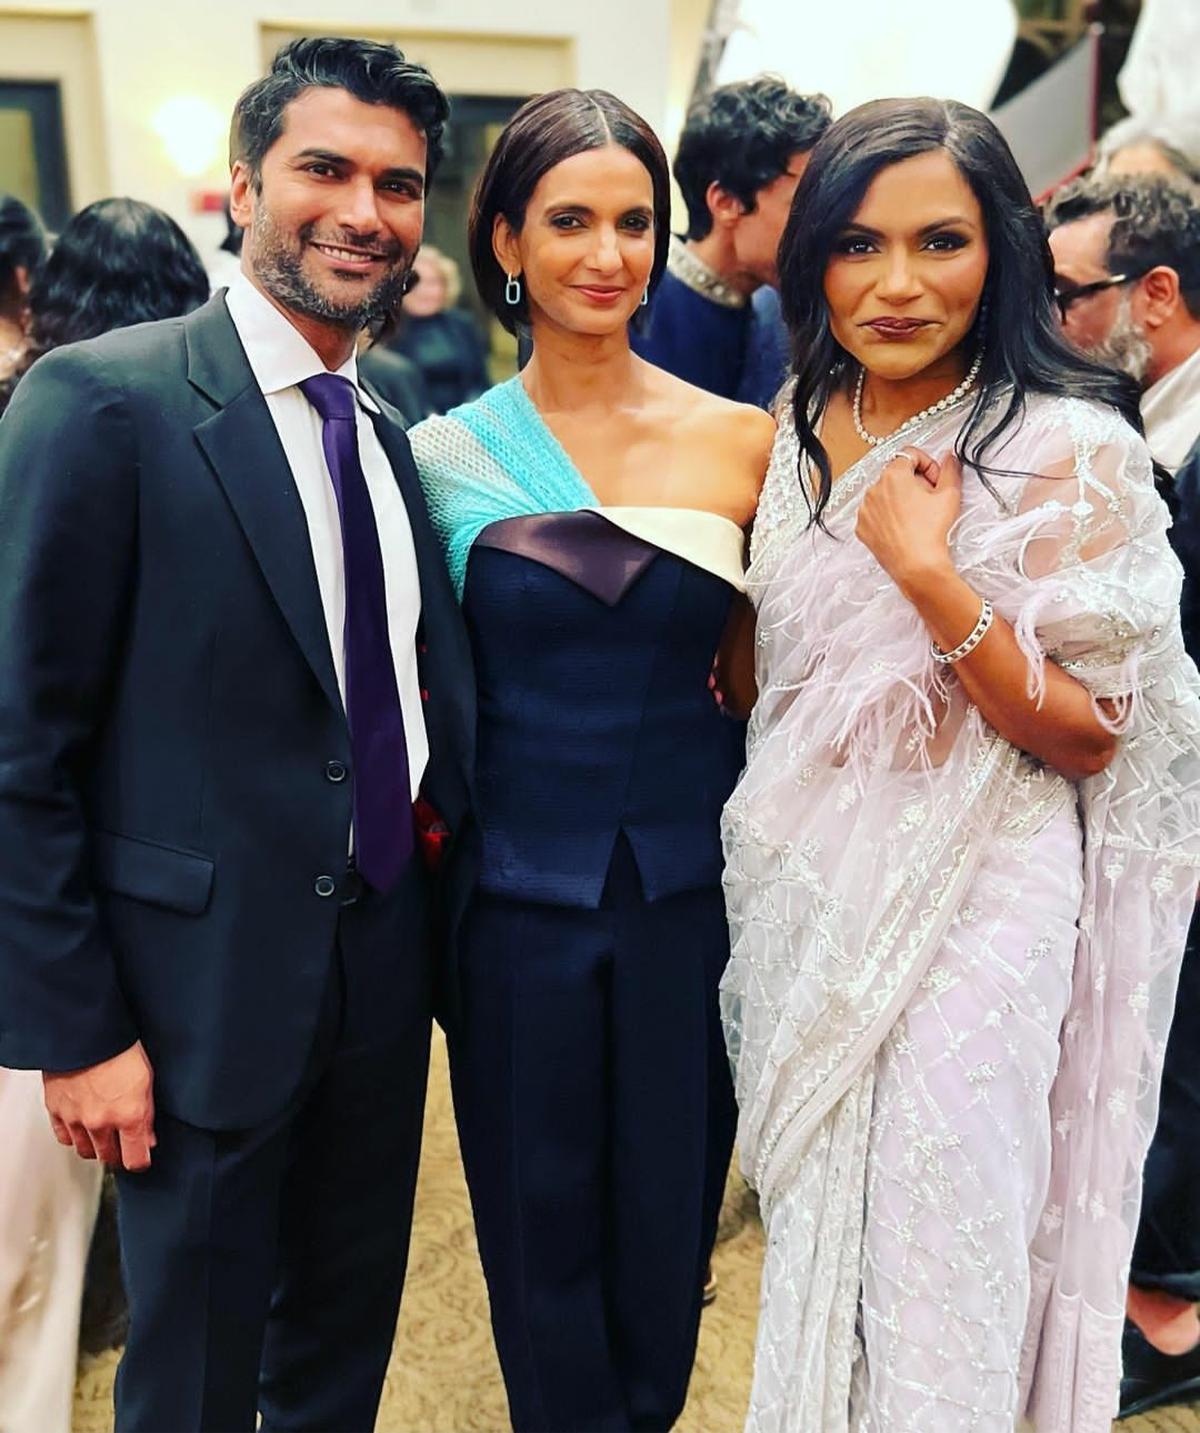 Poorna Jagannathan with actor Sendhil Ramamurthy and actor-producer Mindy Kaling